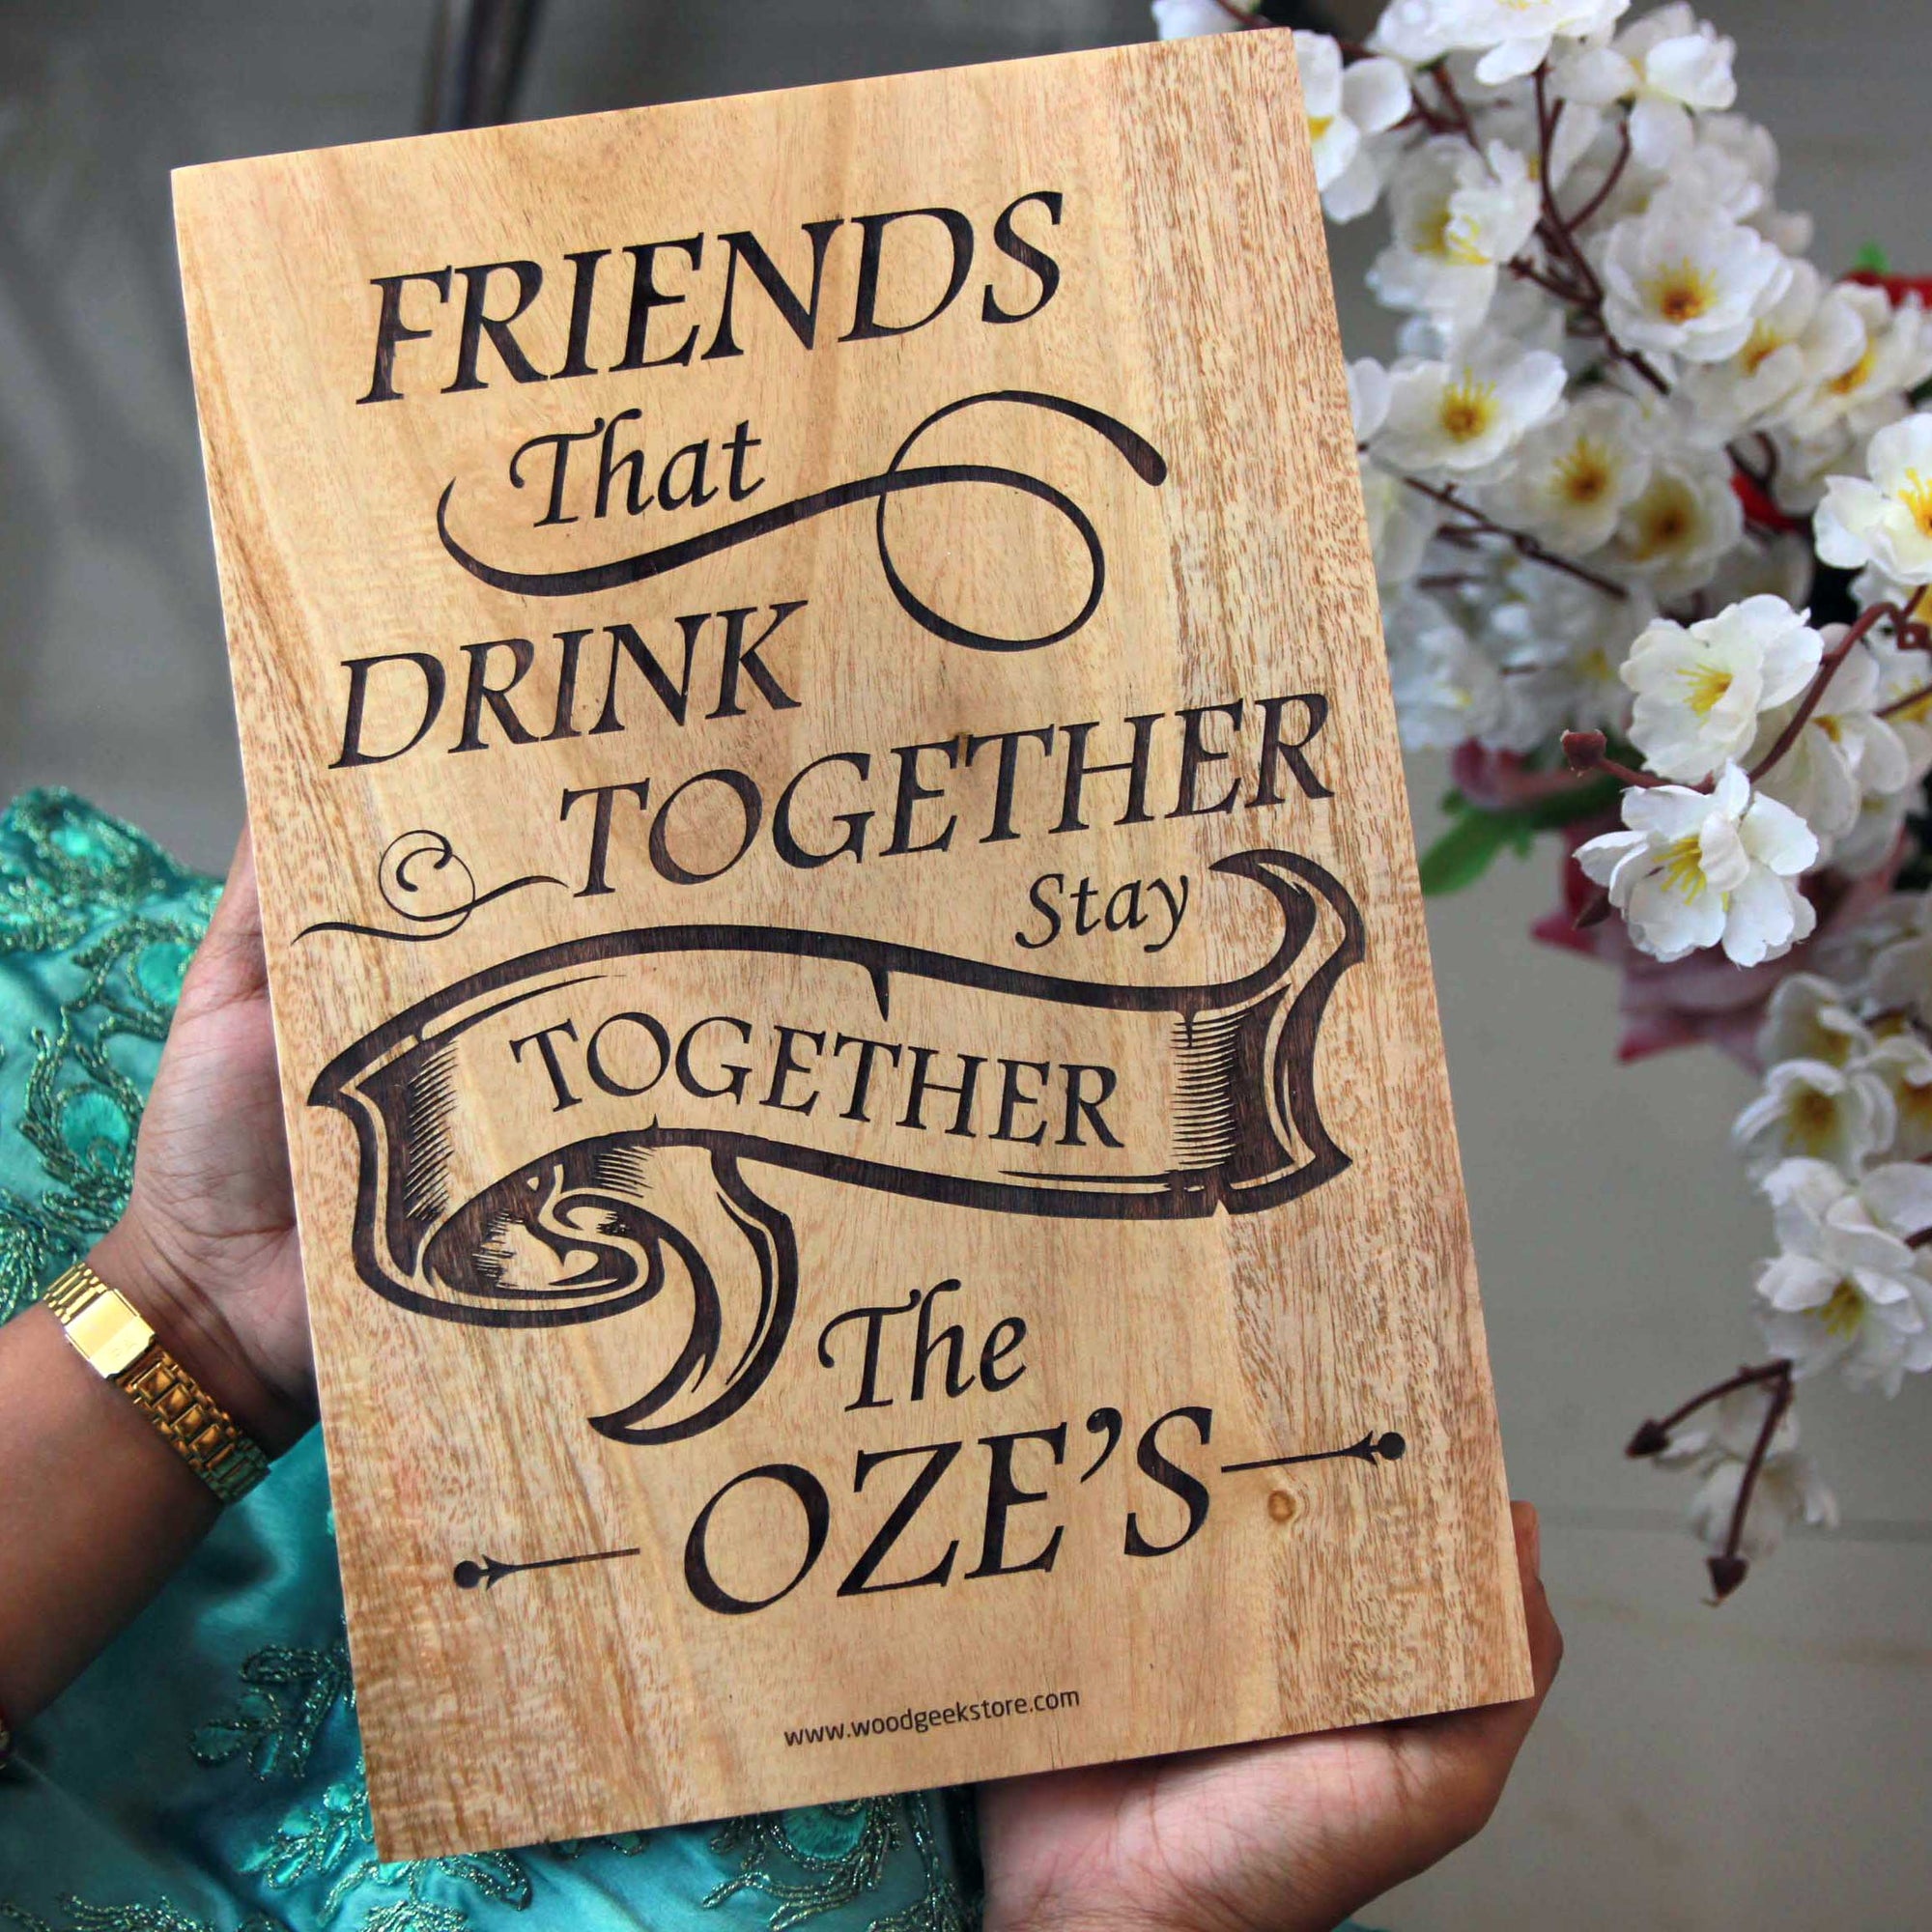 https://cdn.shopify.com/s/files/1/0941/2500/products/friends-that-drink-together-stay-together-engraved-qiote-on-wood-gift-for-friends-square_9fbd5404-9c75-4fef-bfe4-bc2177229c58_2000x.jpg?v=1660380097